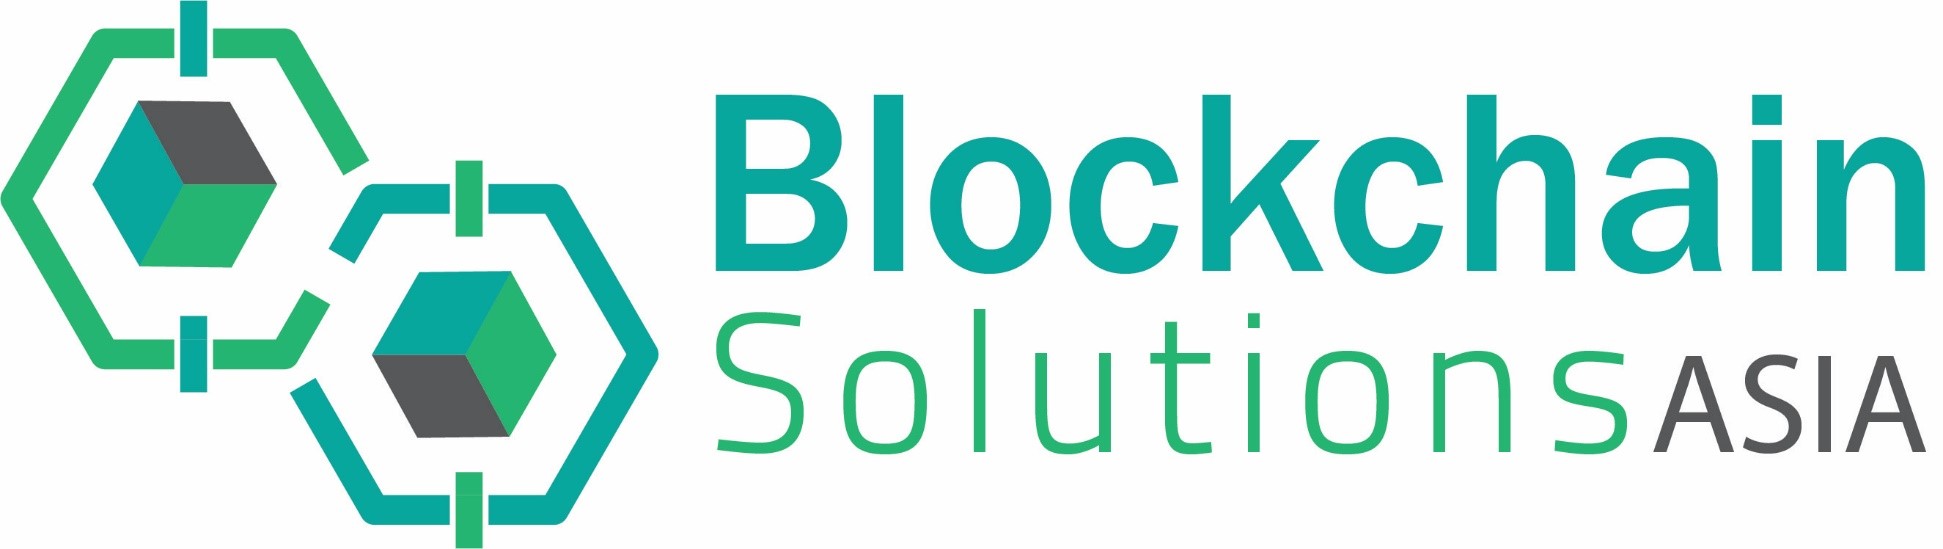 The Blockchain Solutions Asia 2018 (Bsa2018) Conference And Exhibition To Discuss Blockchain Applications Beyond Cryptocurrency